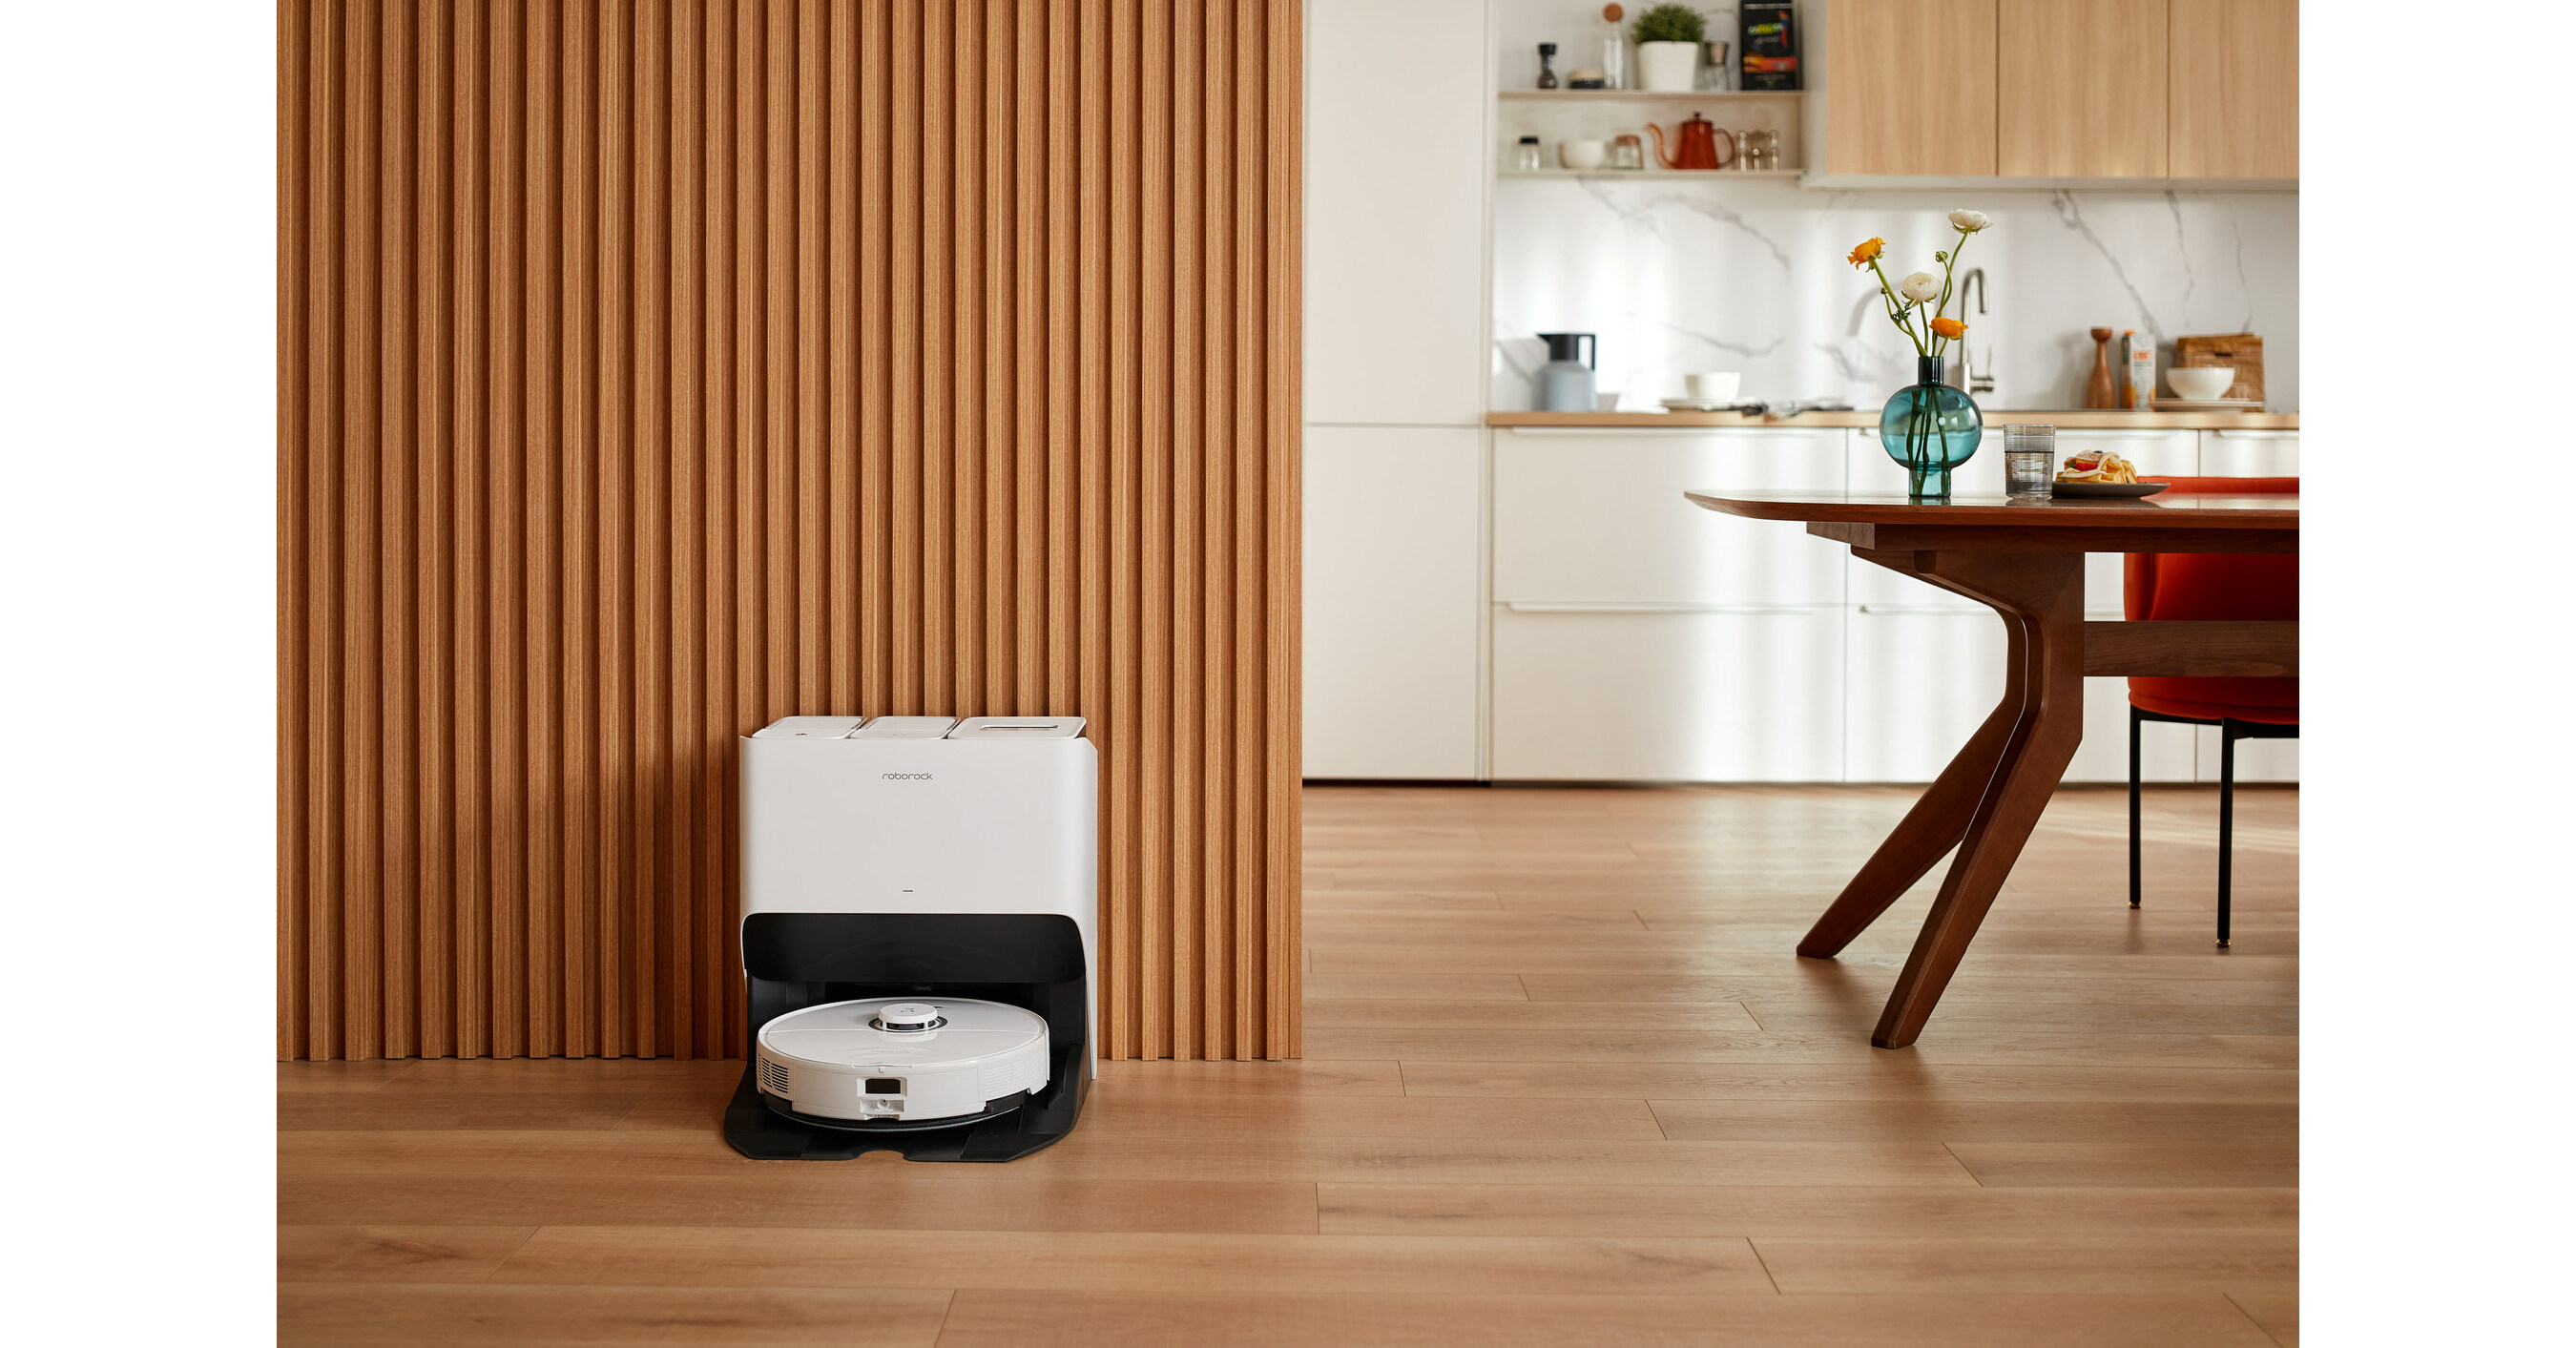 Roborock Debuts All-New Cleaning Systems, Including Roborock S8 Pro Ultra  at CES 2023